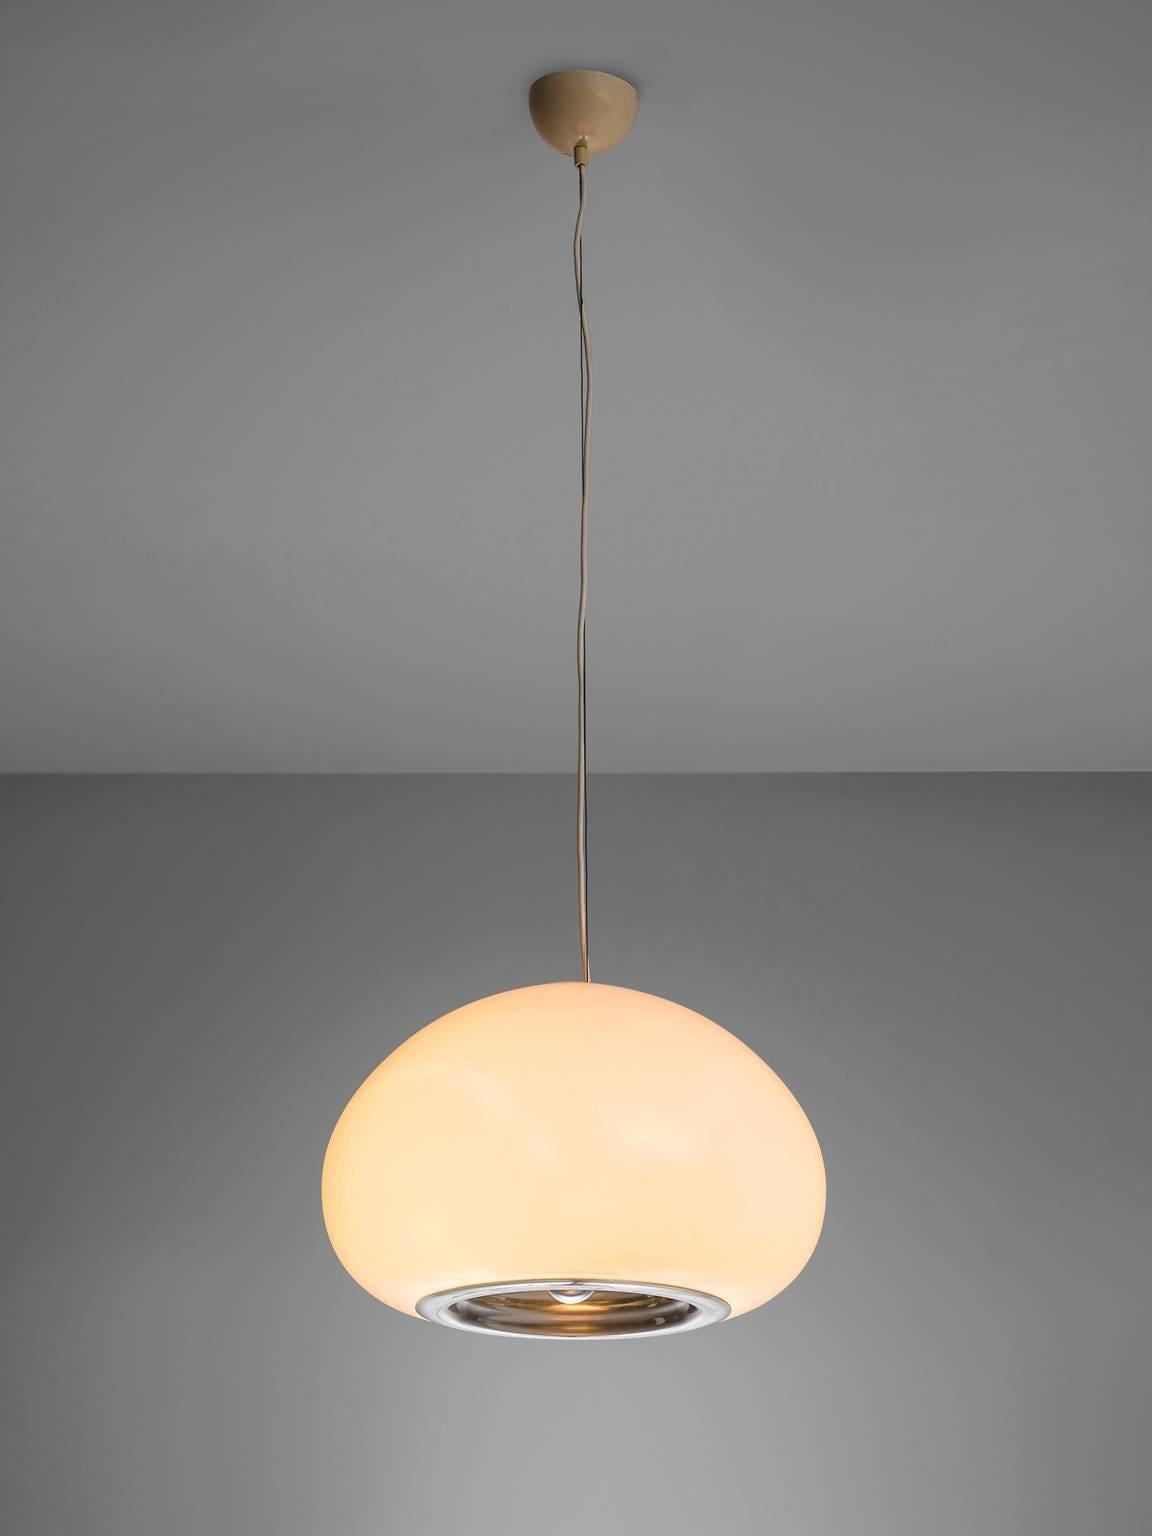 Italian 'black and white' pendant by Castiglioni for Flos, 1960s

Well designed pendant in white glass, with a chrome conical element on the bottom inside. The structured surface is nicely patinated and beautifully reflects the light, giving this